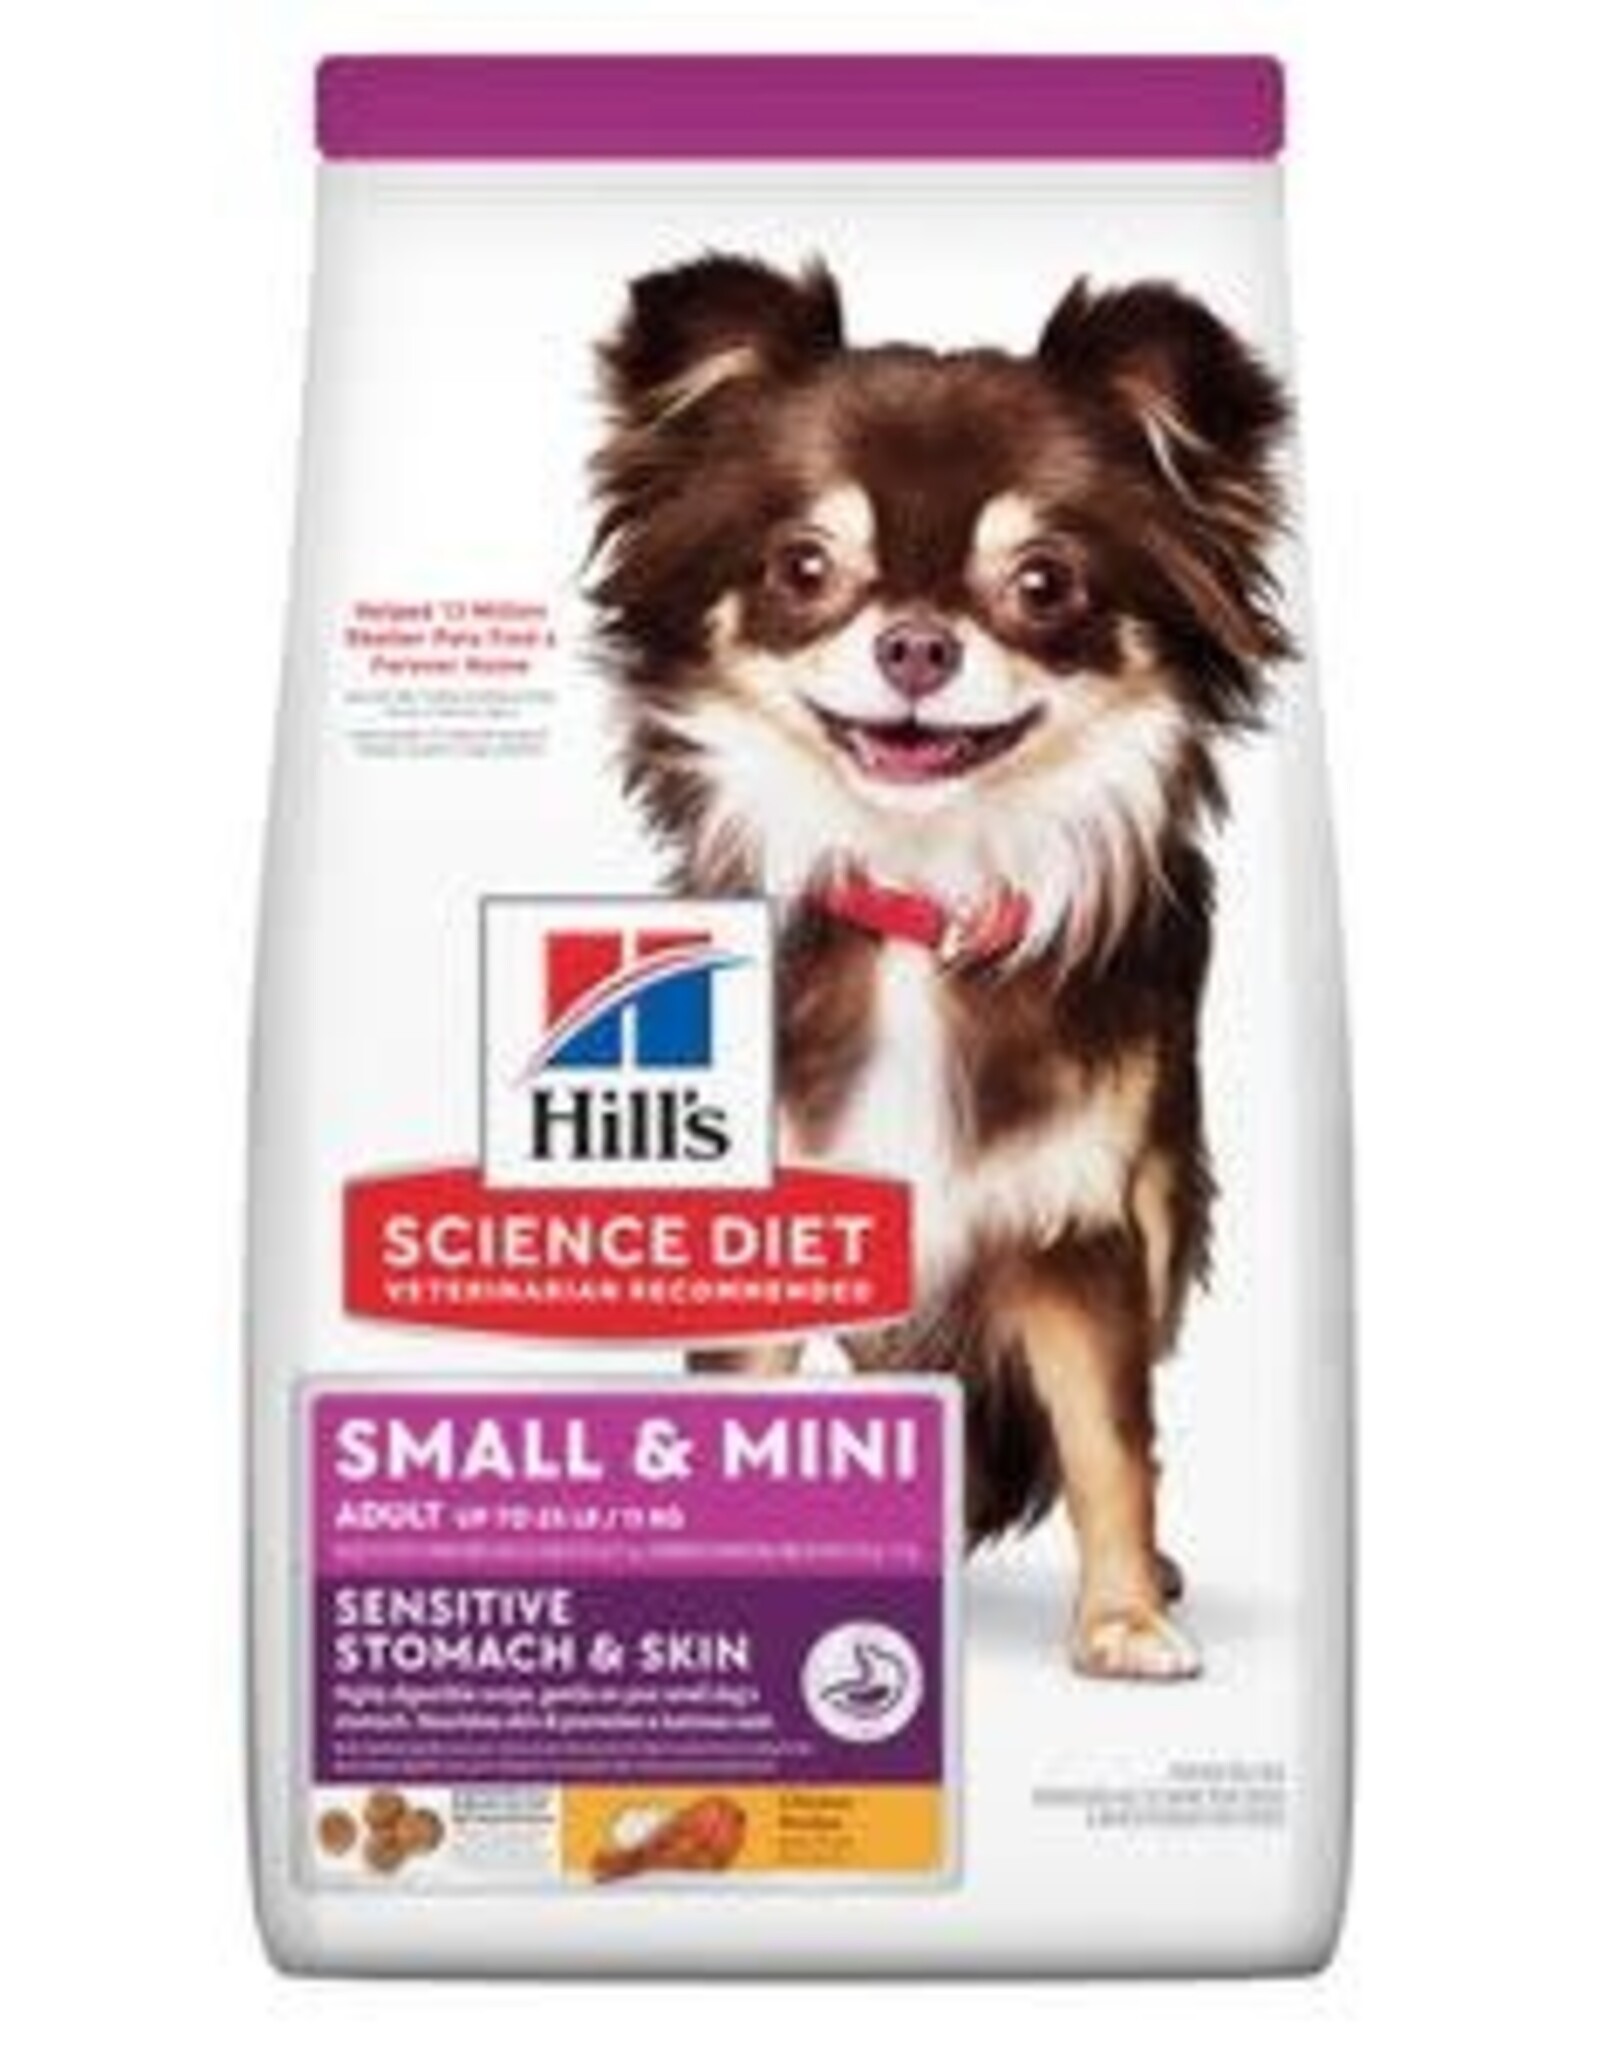 SCIENCE DIET HILL'S SCIENCE DIET CANINE SENSITIVE STOMACH & SKIN SMALL & MINI ADULT 4LBS